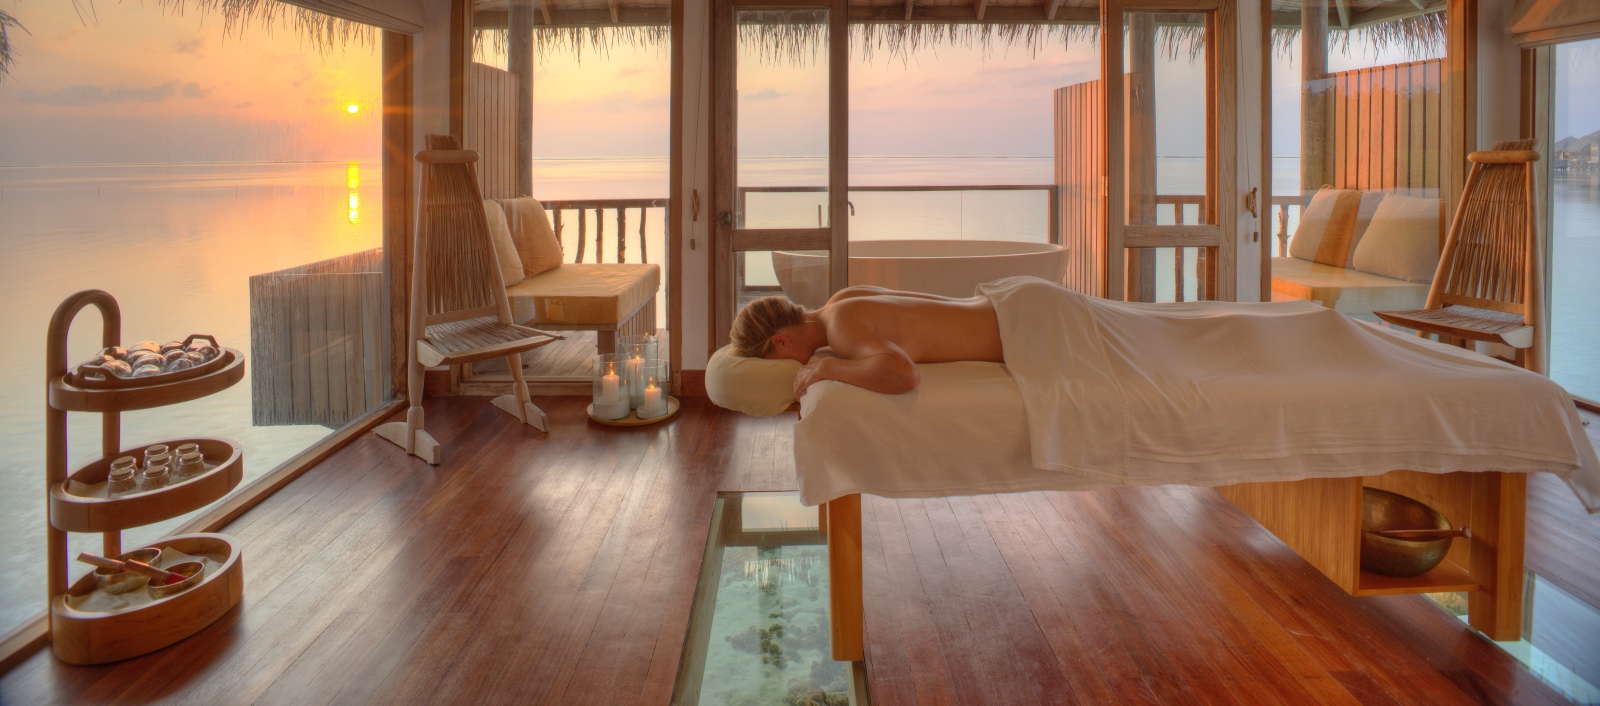 Spa treatment room overlooking the ocean at sunset at luxury resort Gili Lankanfushi in the Maldives